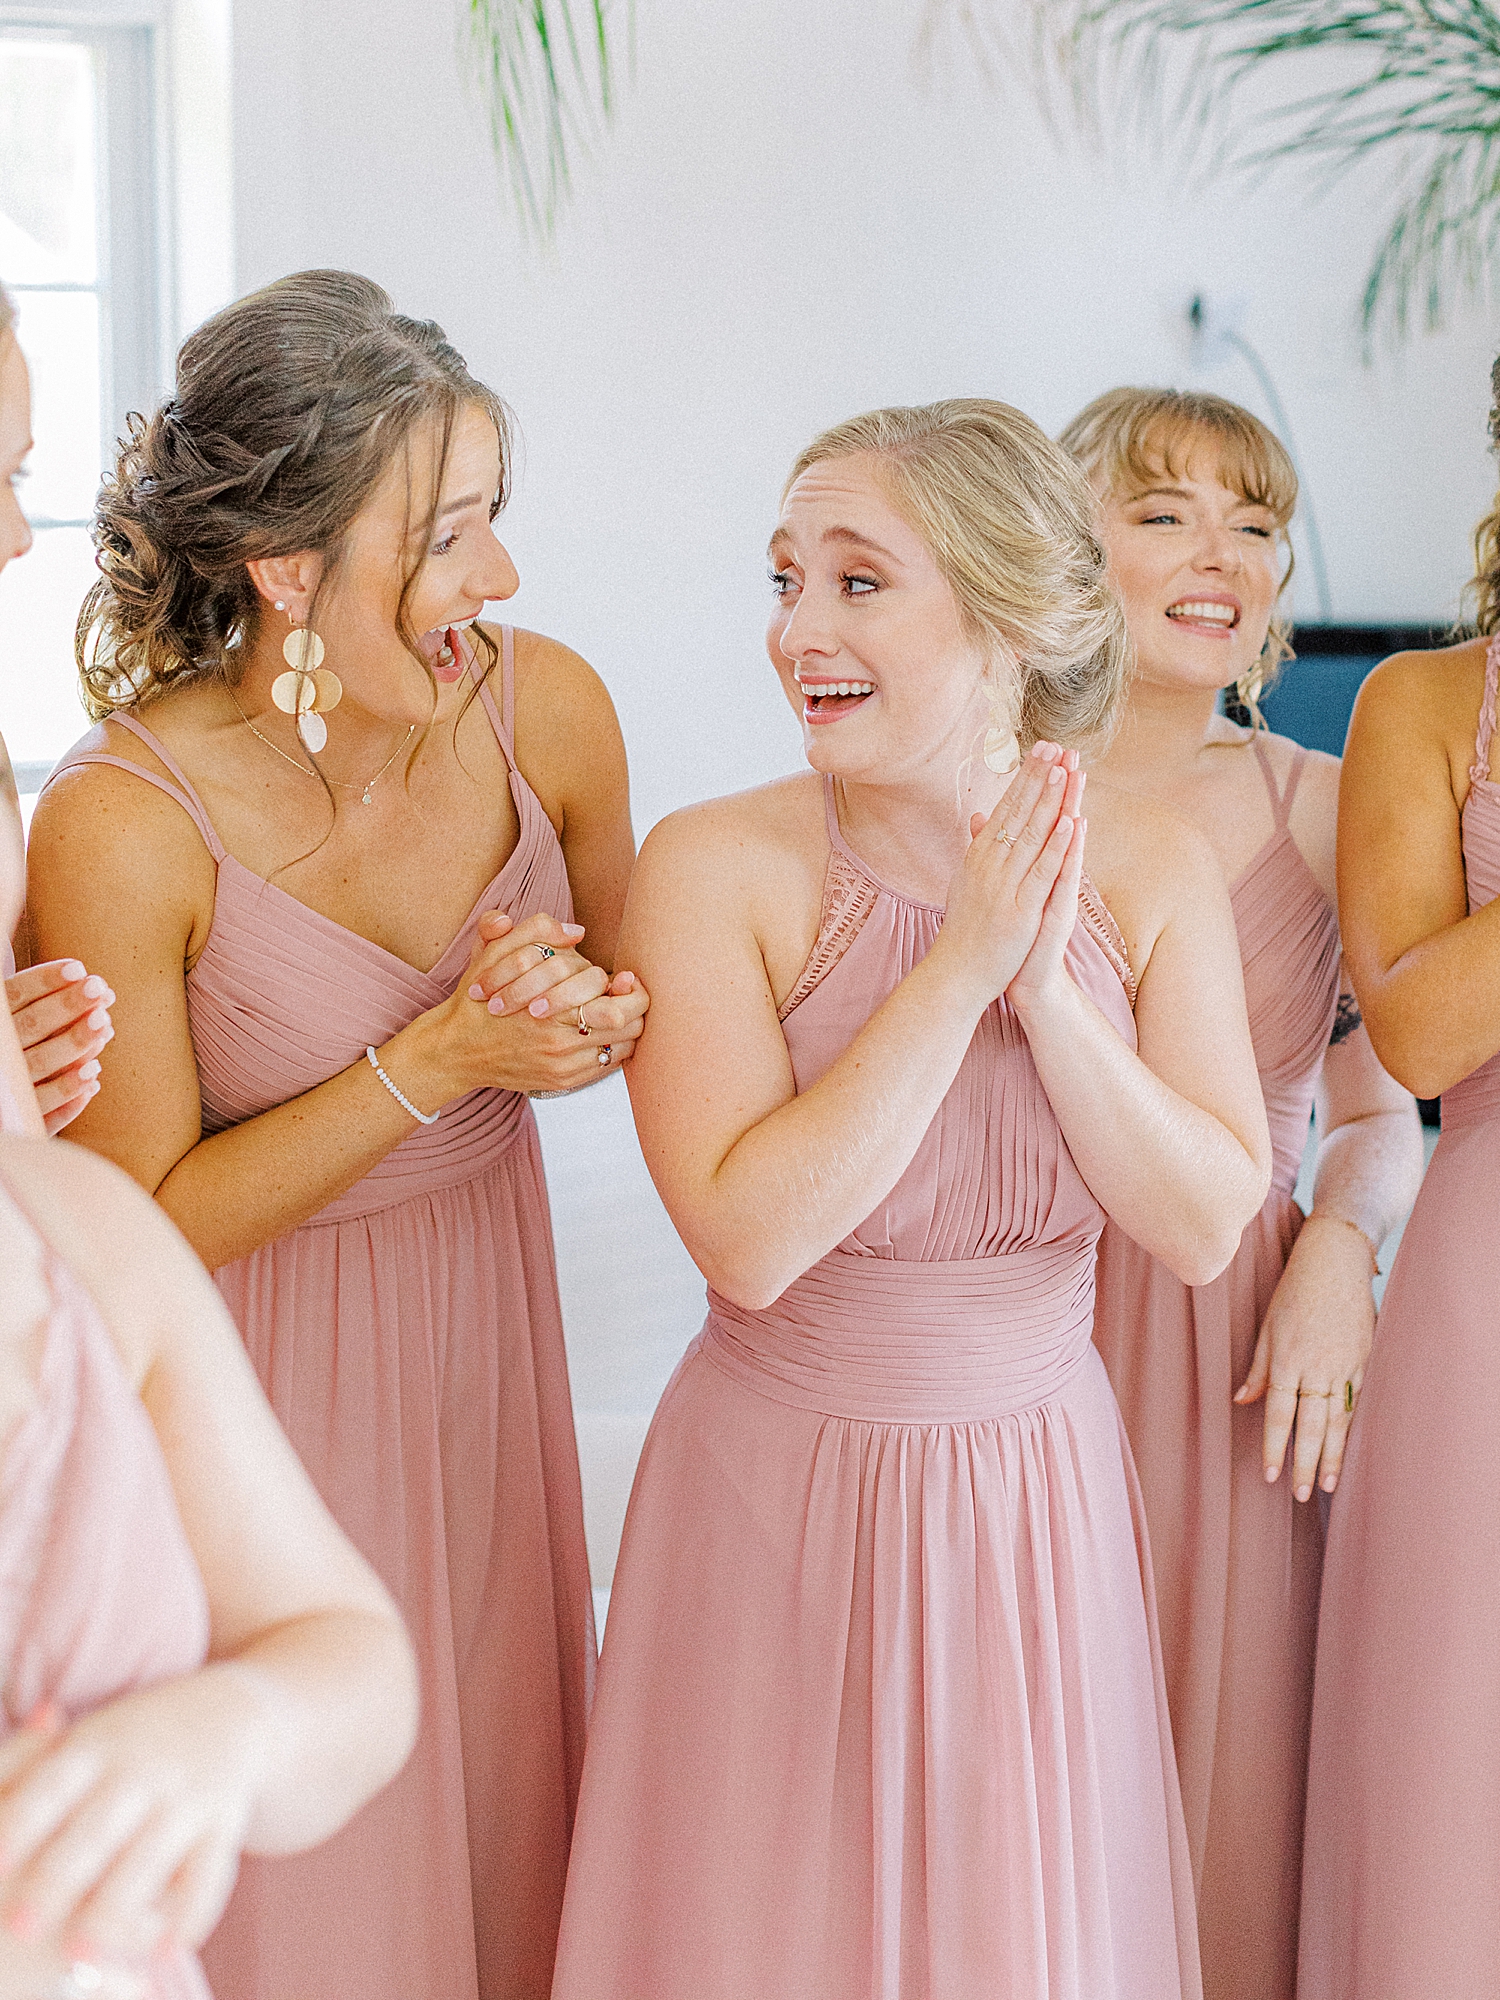 Bridesmaid wearing blush dresses clapping for bride.